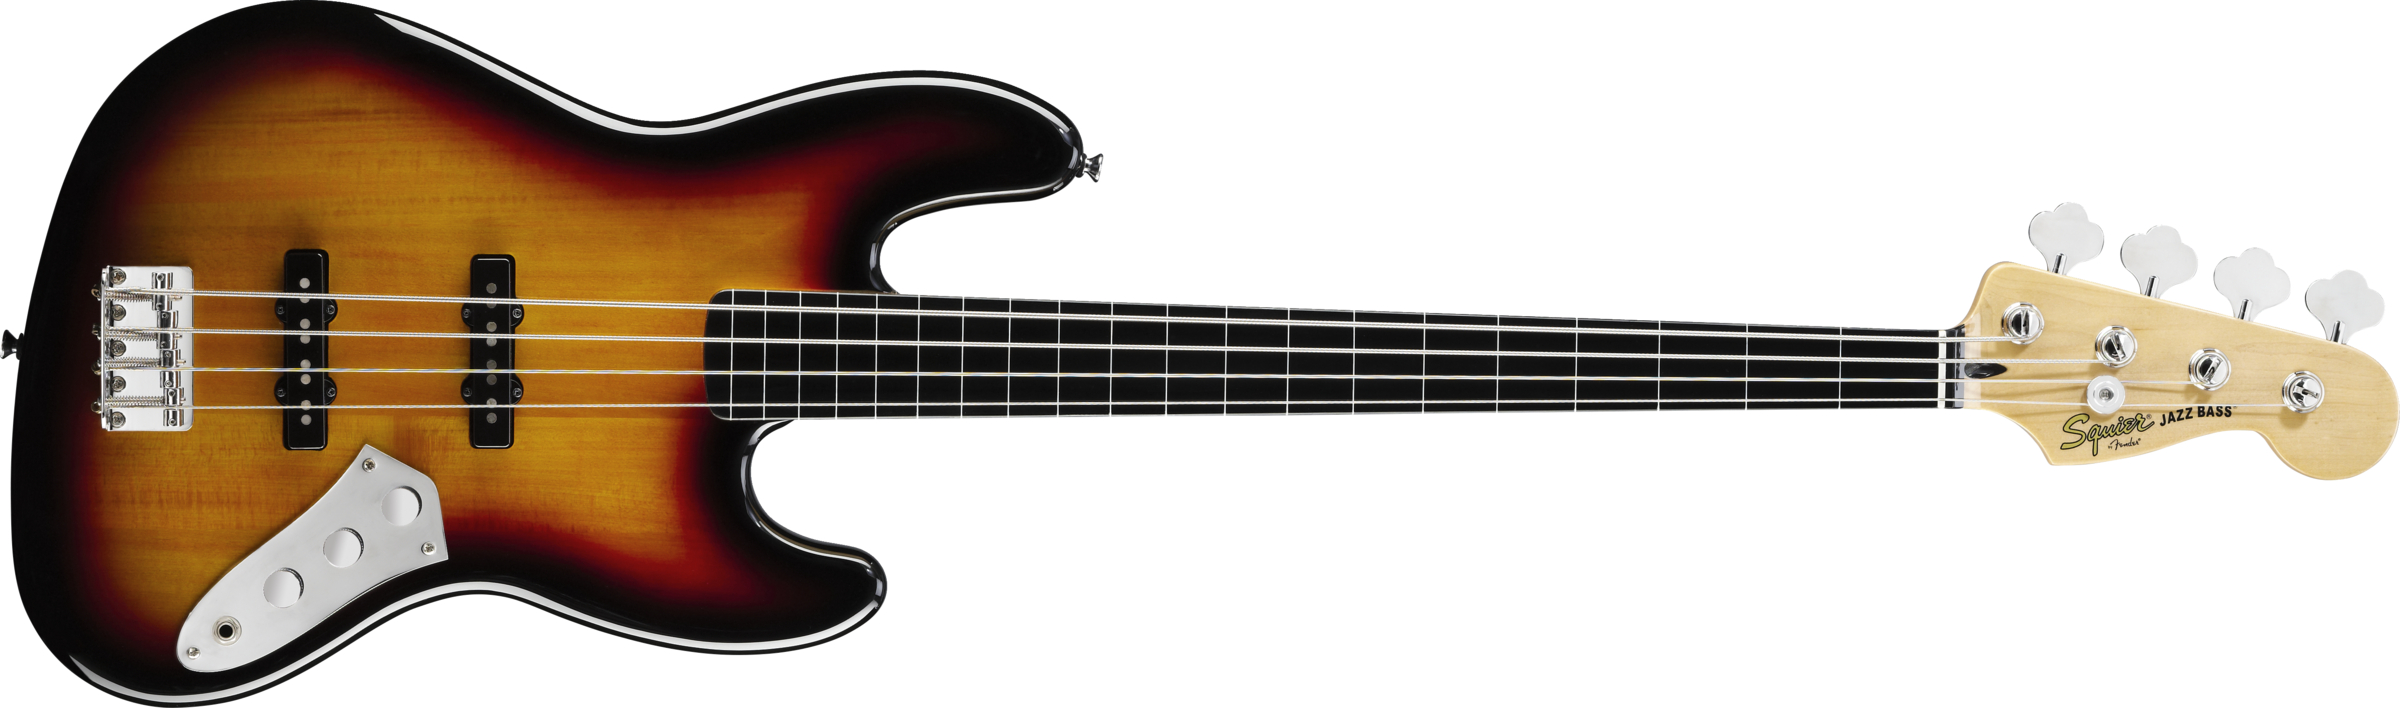 Squier Vintage Modified Jazz Bass Fretless 3-TS.